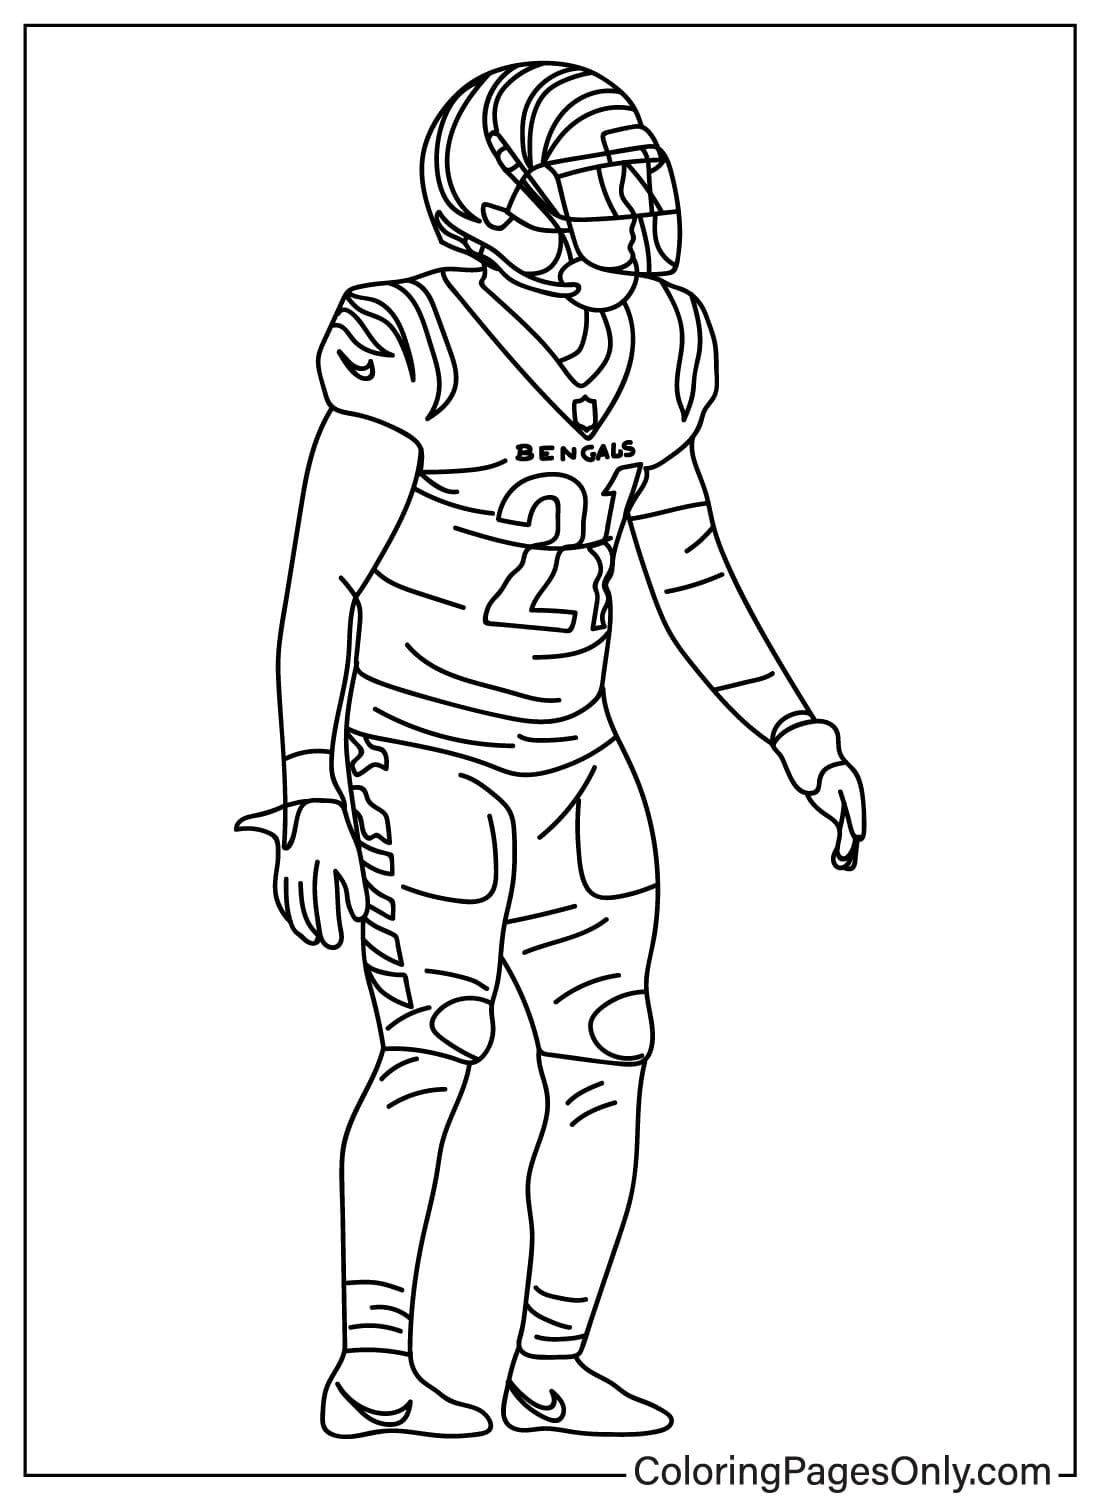 Mike Hilton Coloring Page from Cincinnati Bengals